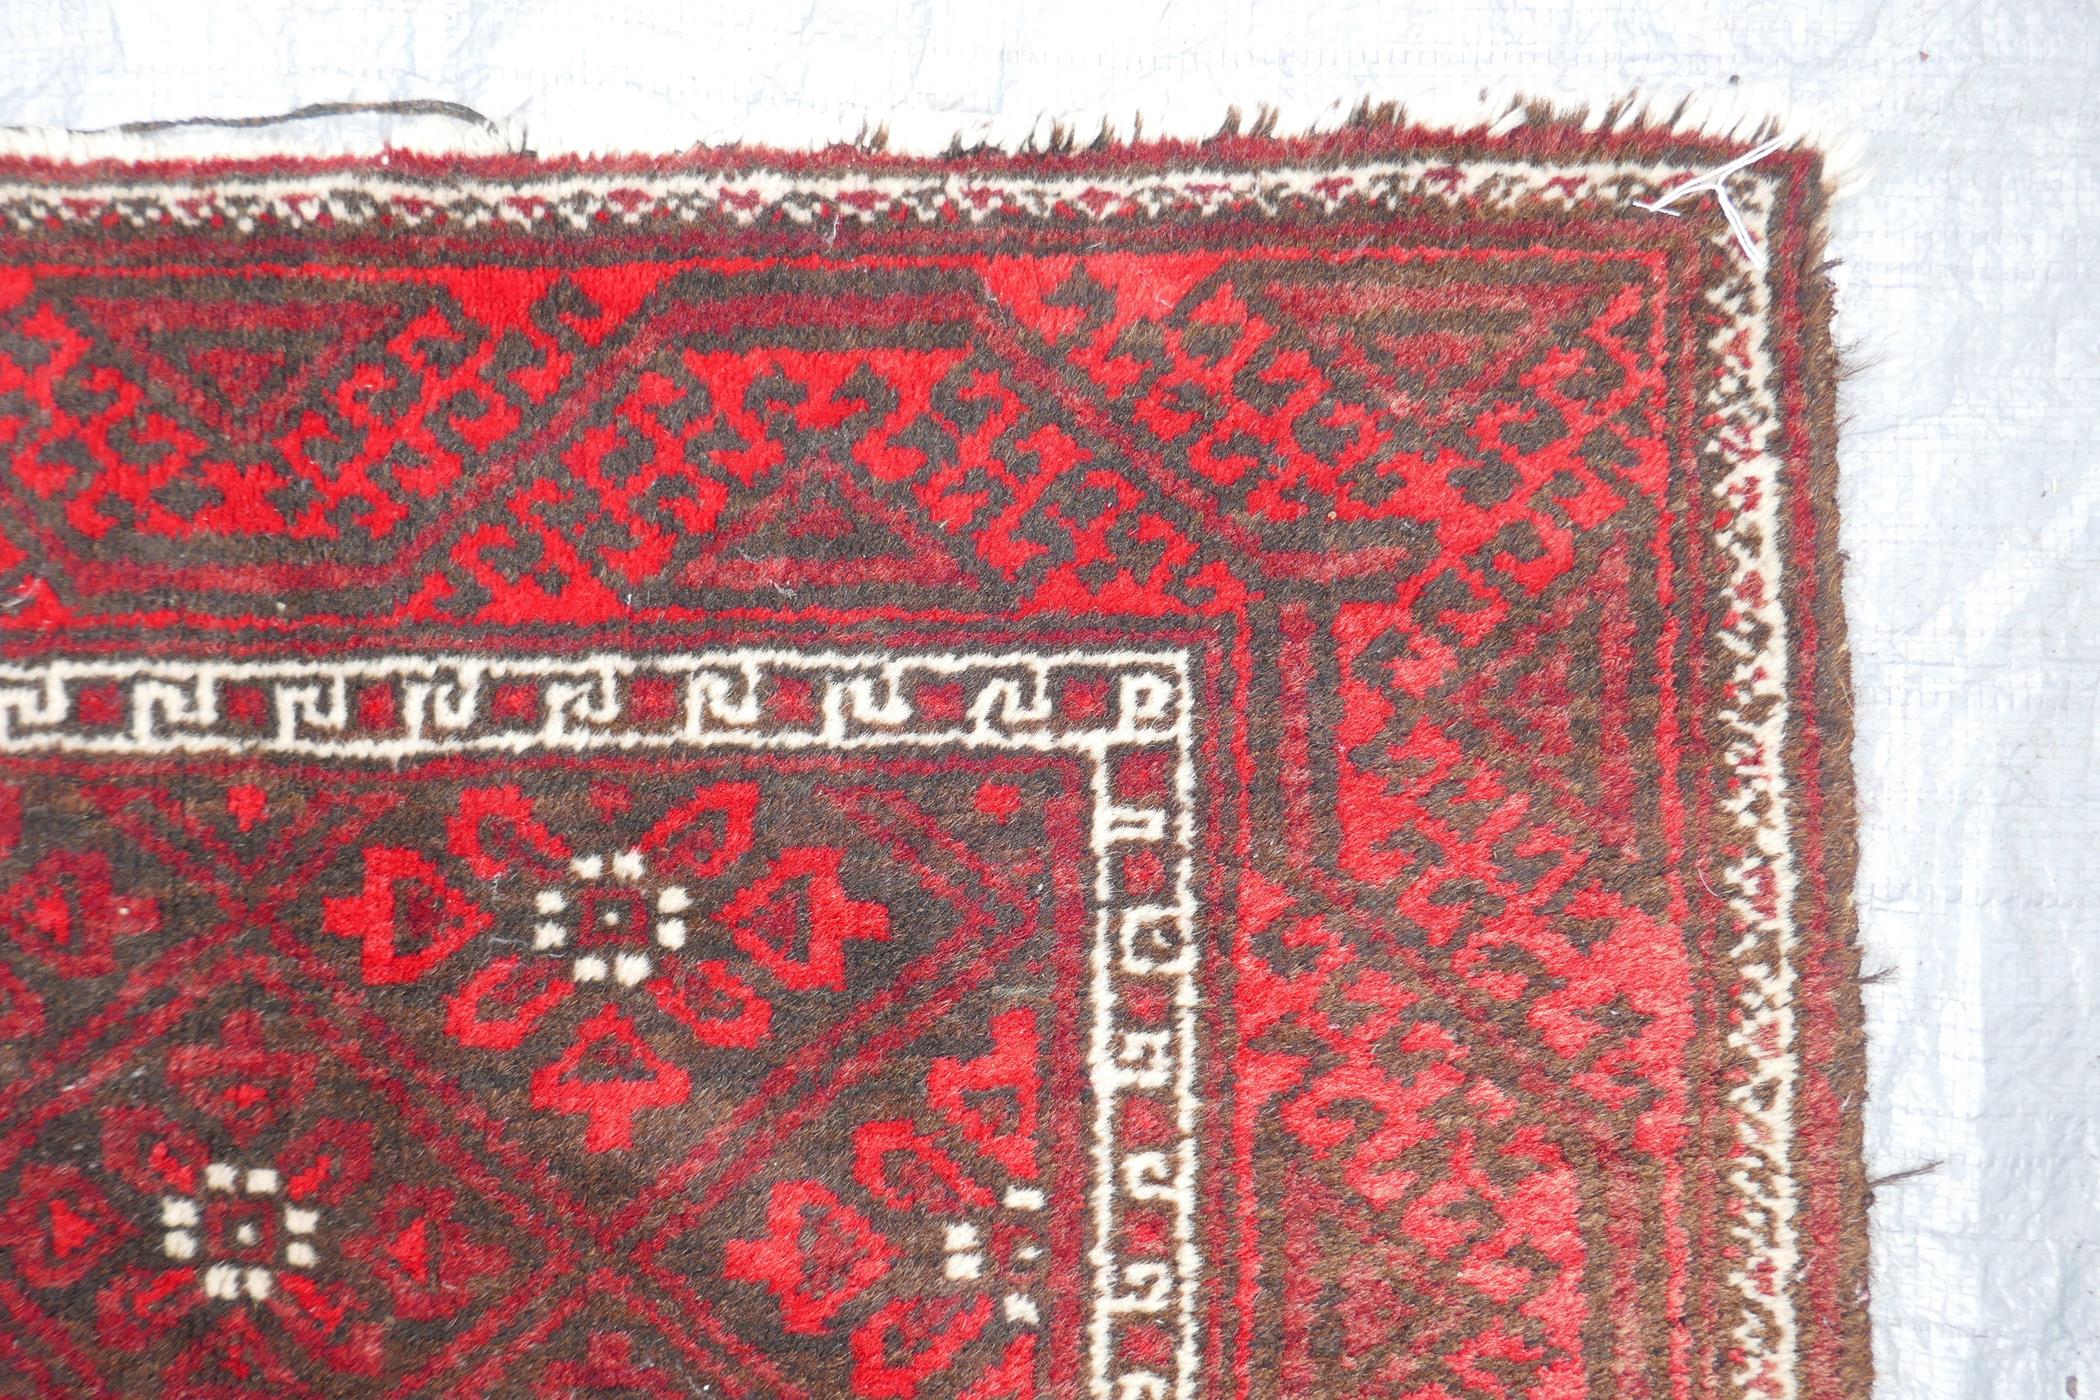 A Middle Eastern red ground wool rug with a repeating diamond pattern design, 34" x 51" - Image 5 of 6